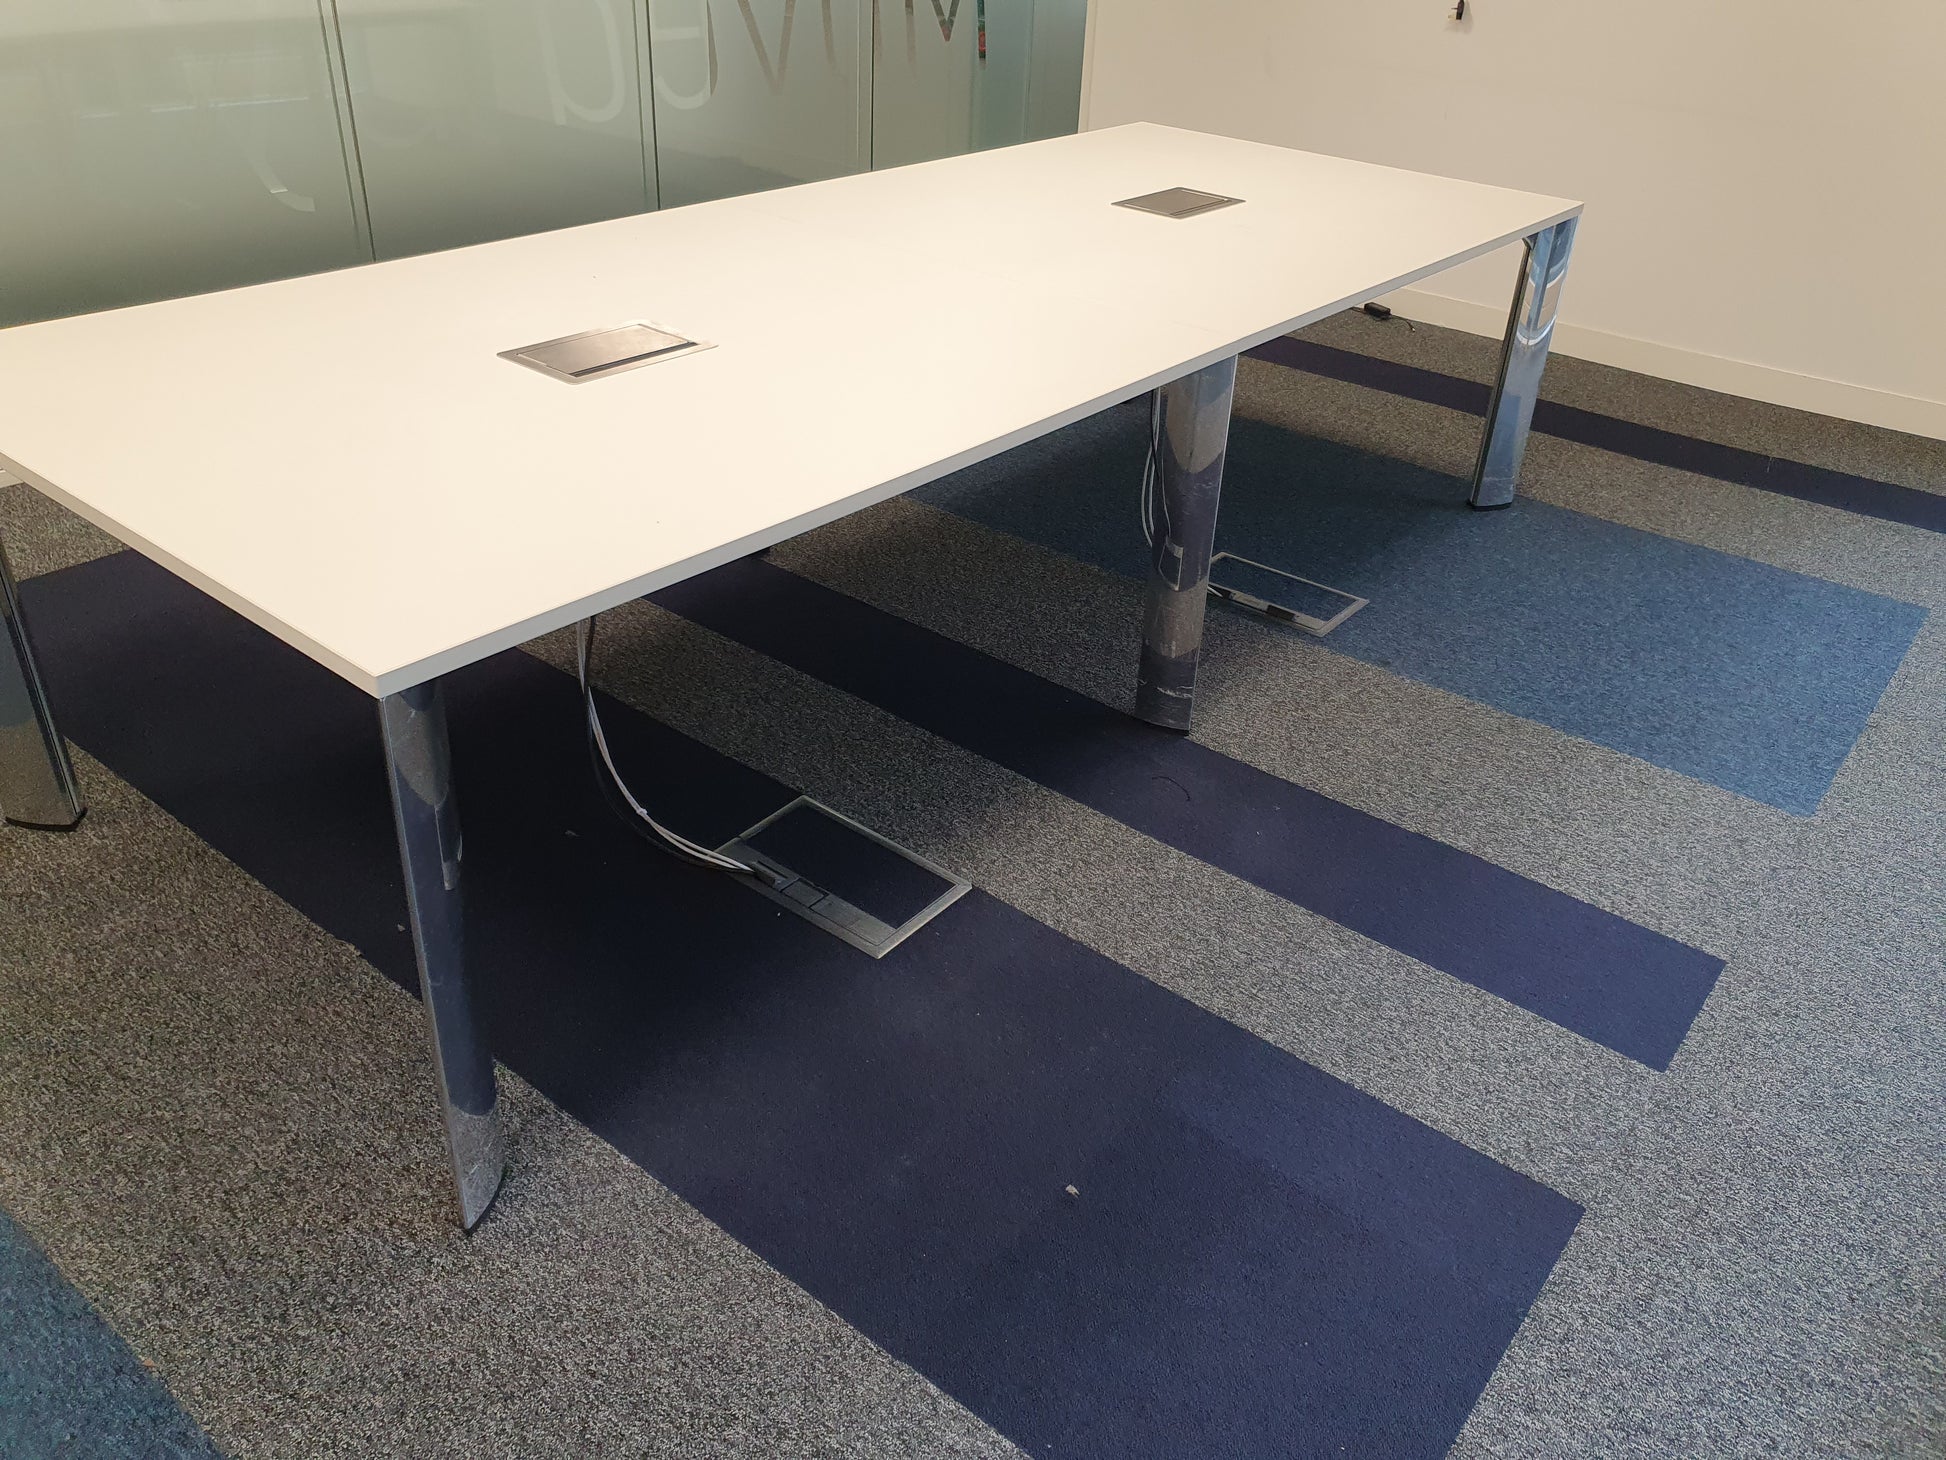 Conference table in meeting room on carpet